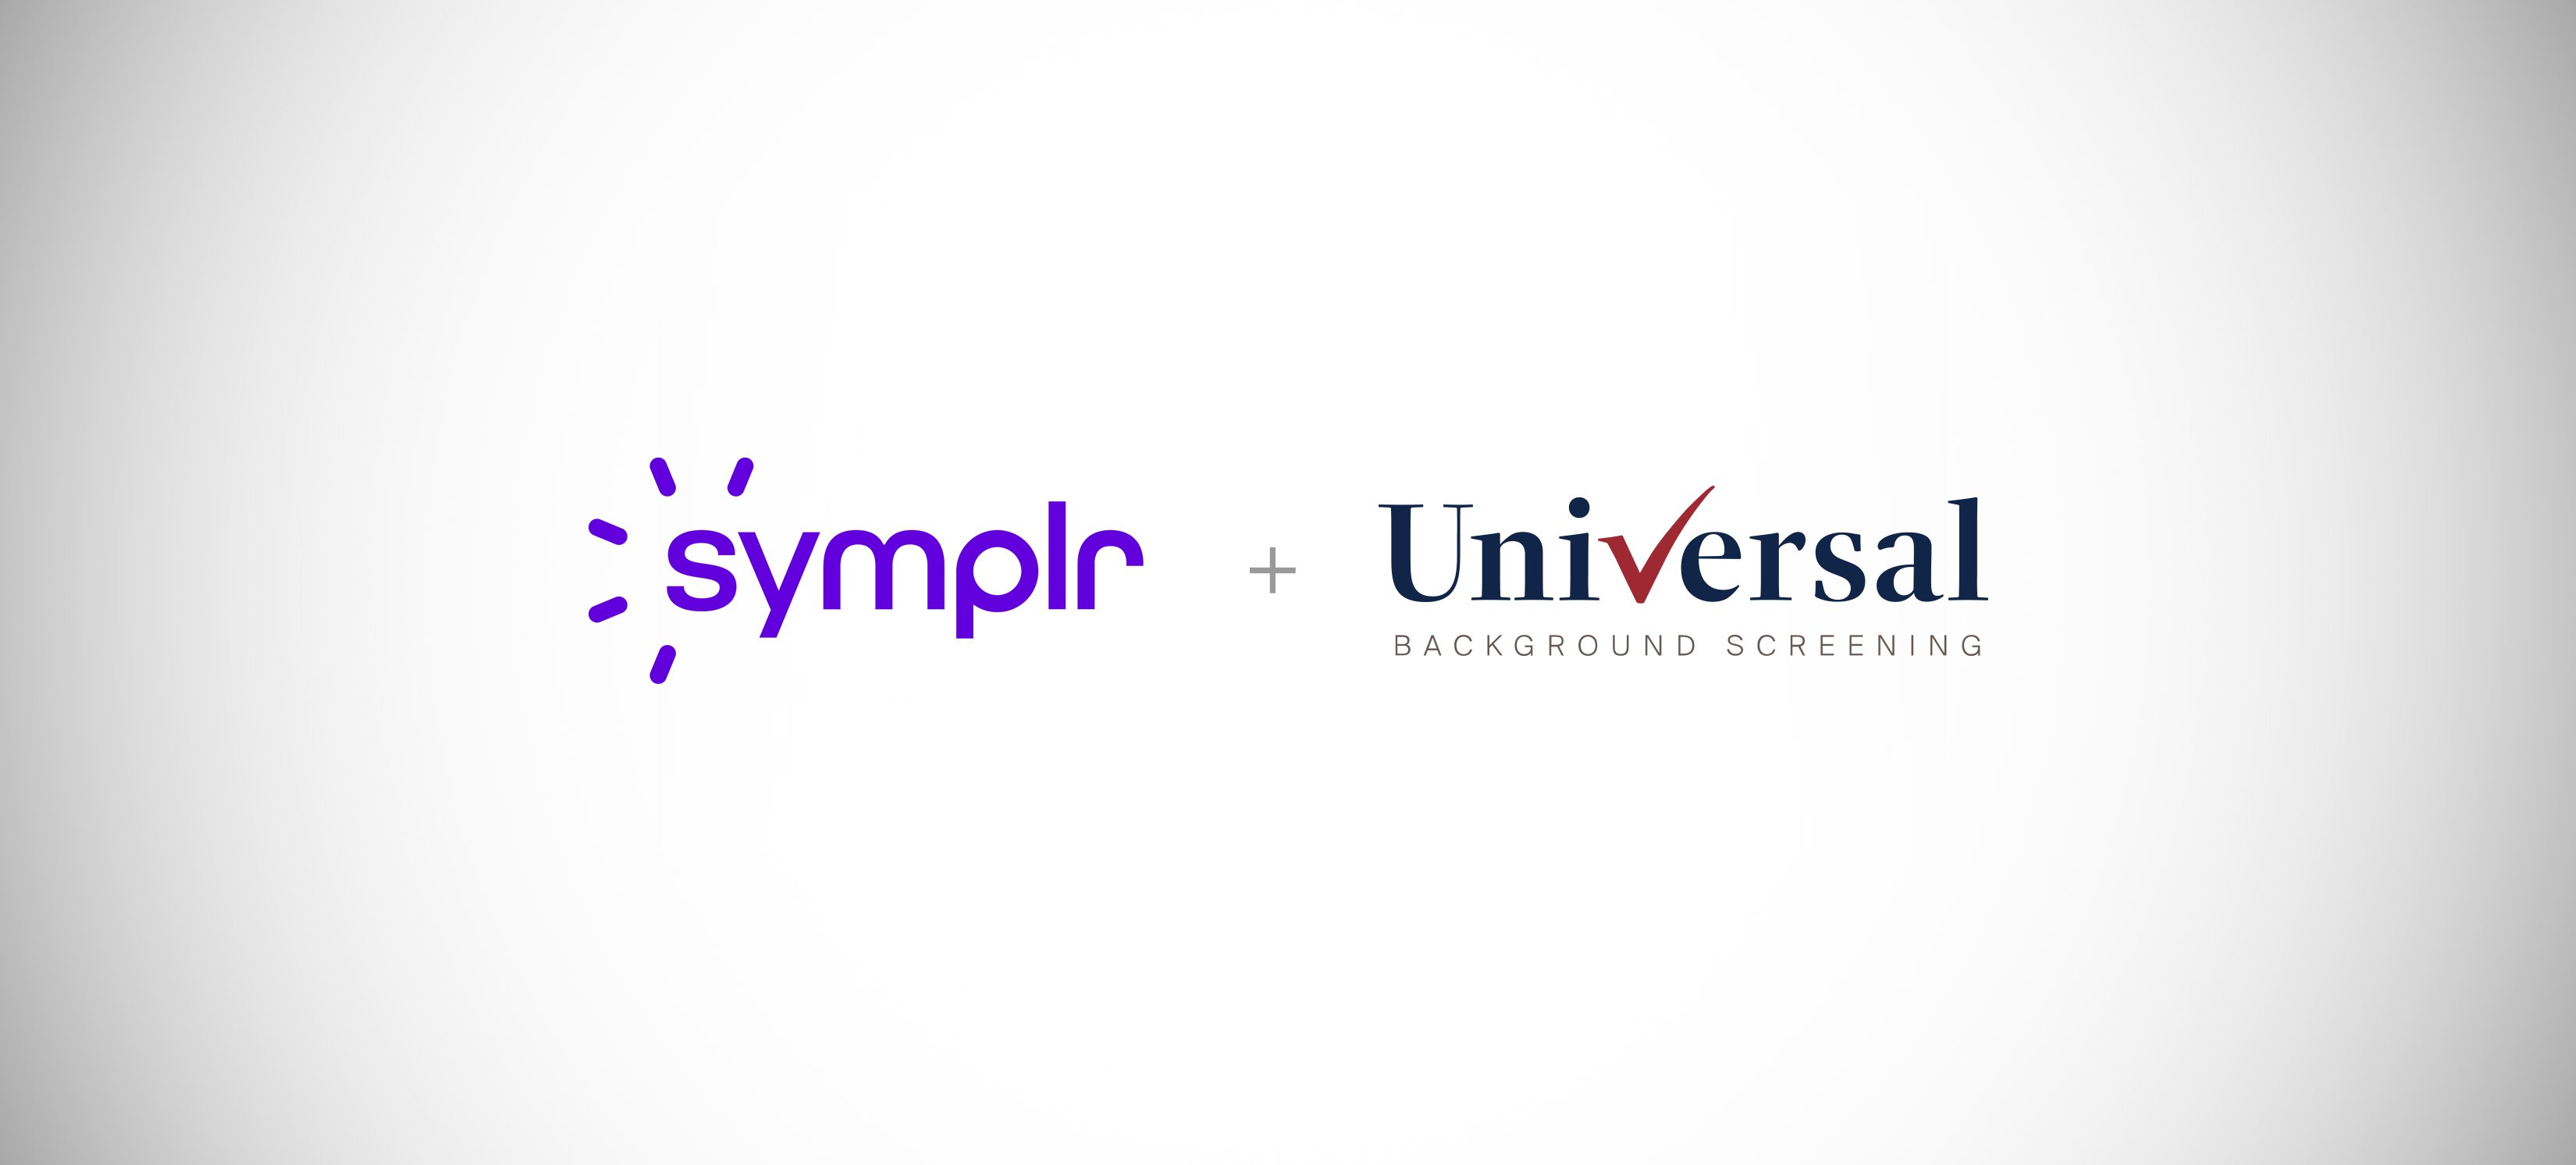 symplr and Universal Background Screening Renew Partnership to Streamline Healthcare Recruiting, Background Checks